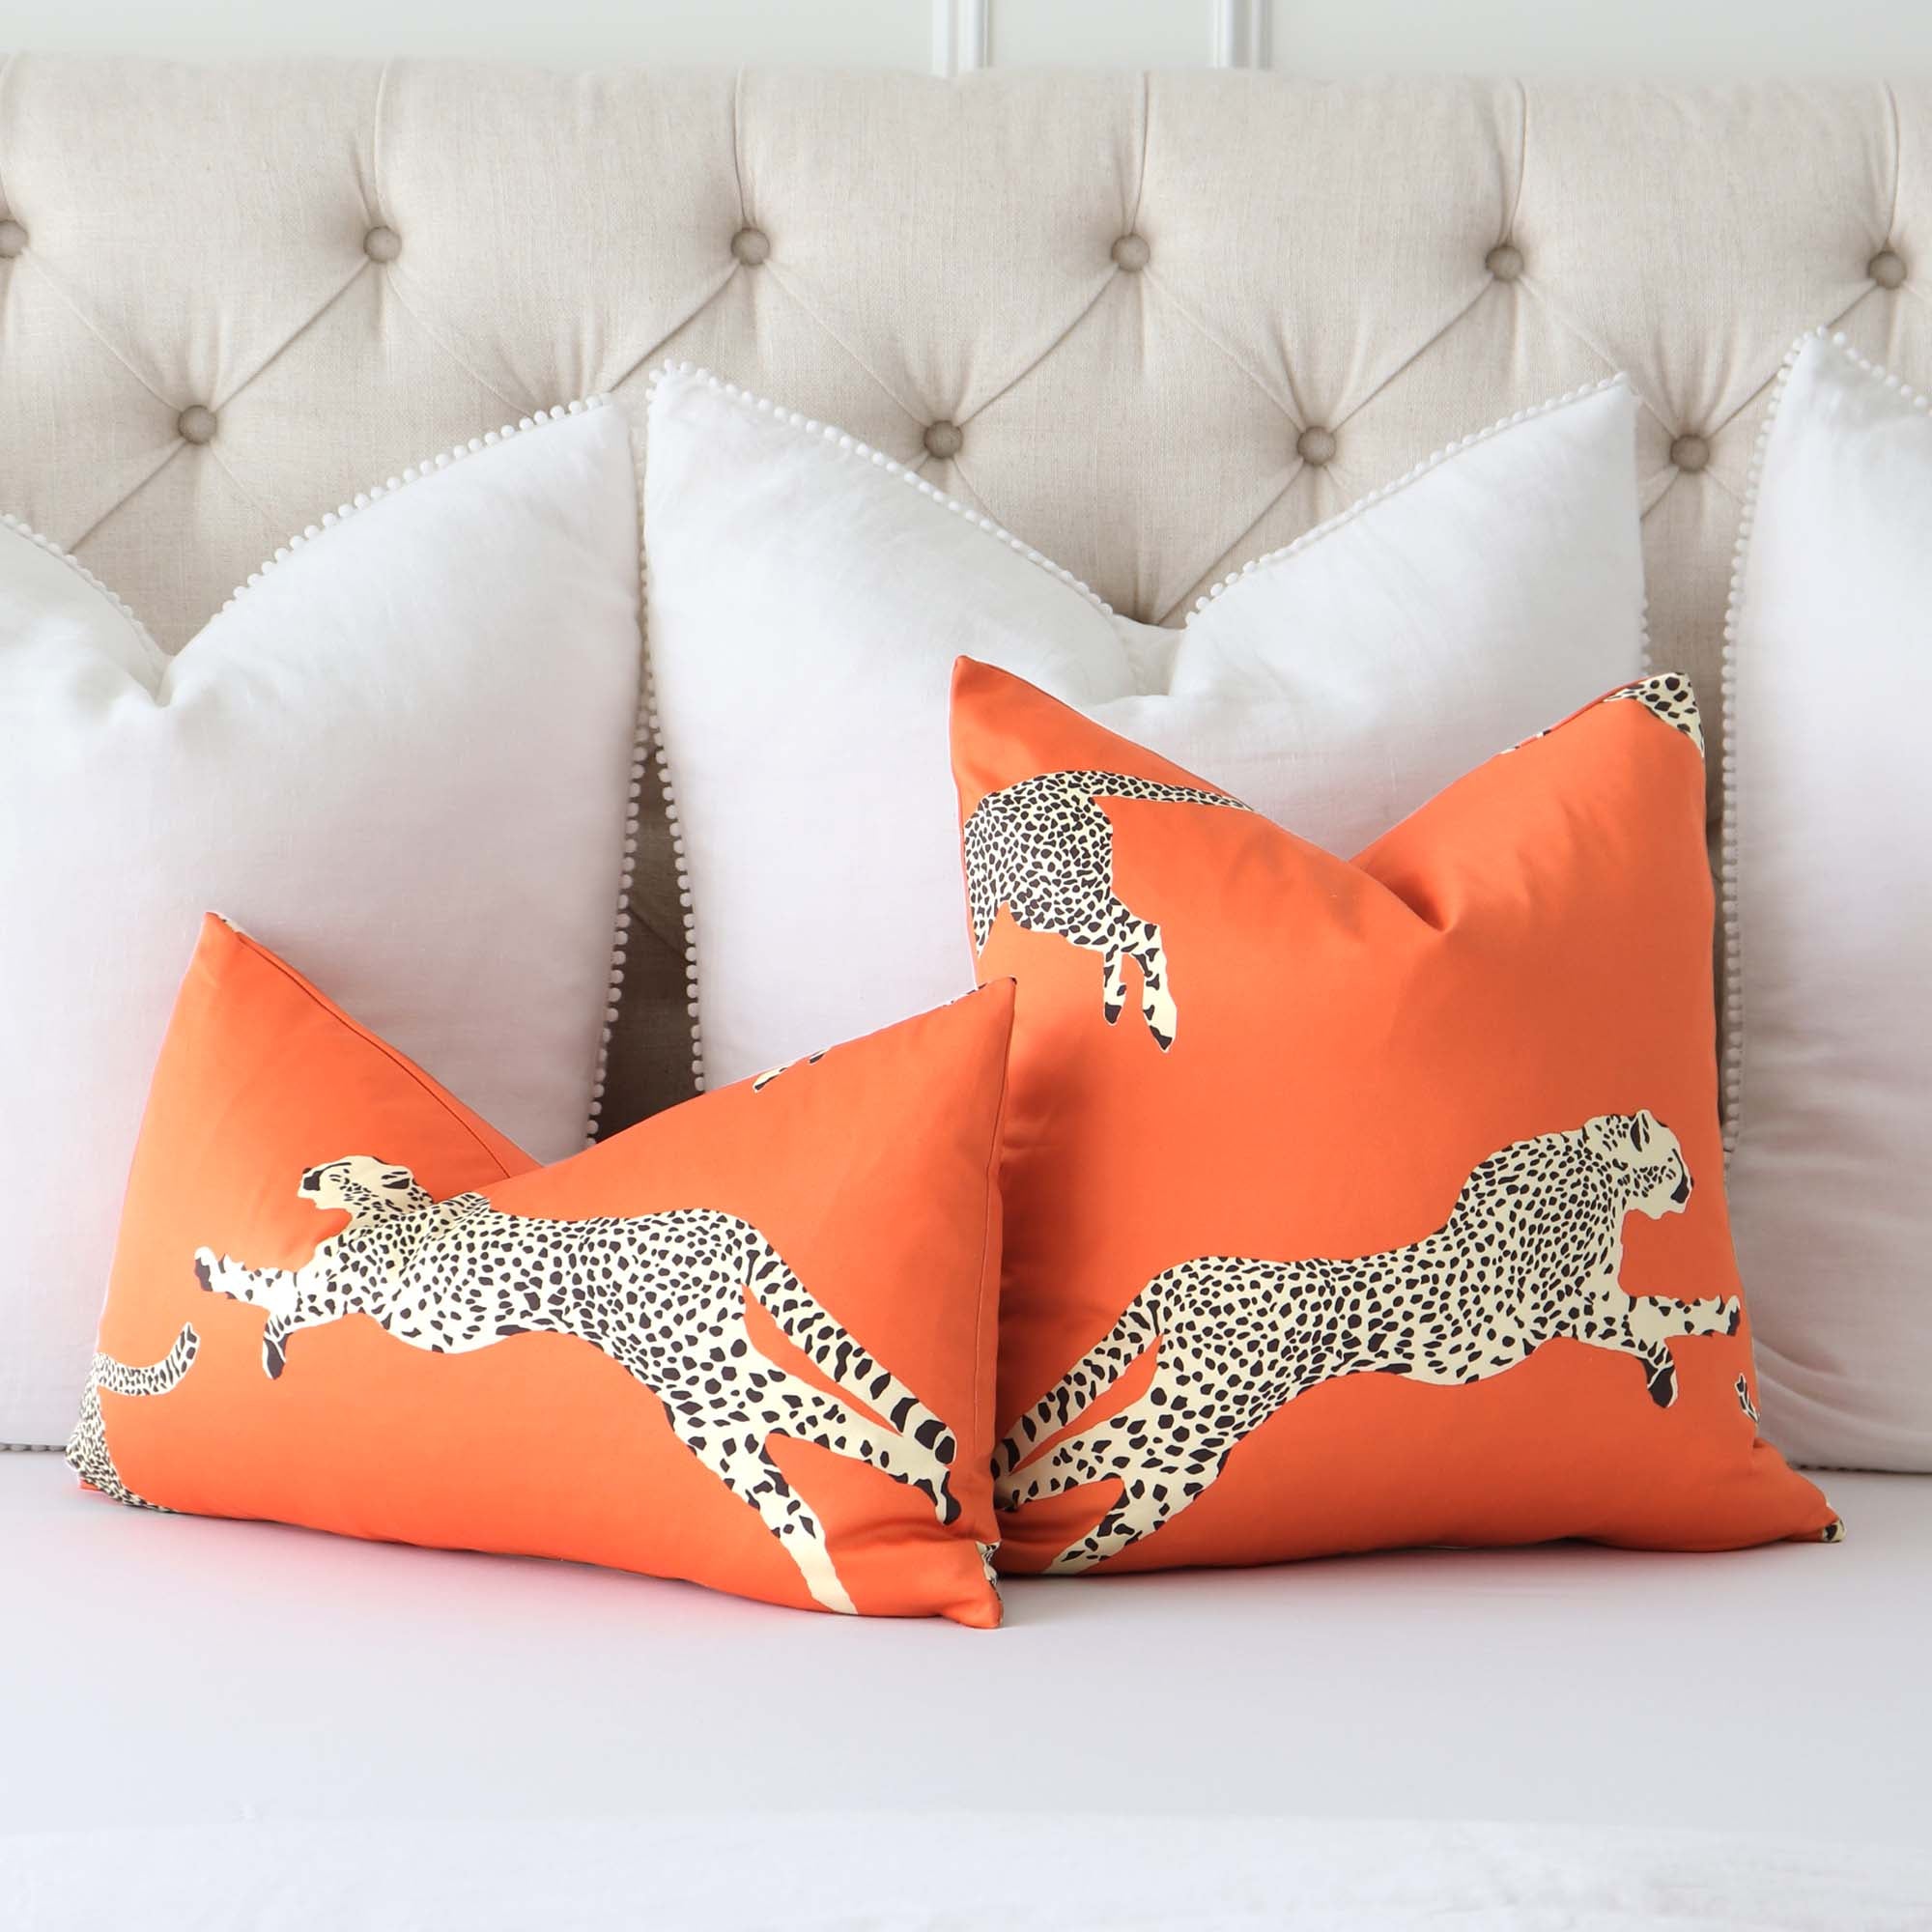 Scalamandre Leaping Cheetah Clementine Orange Luxury Throw Pillow Cover